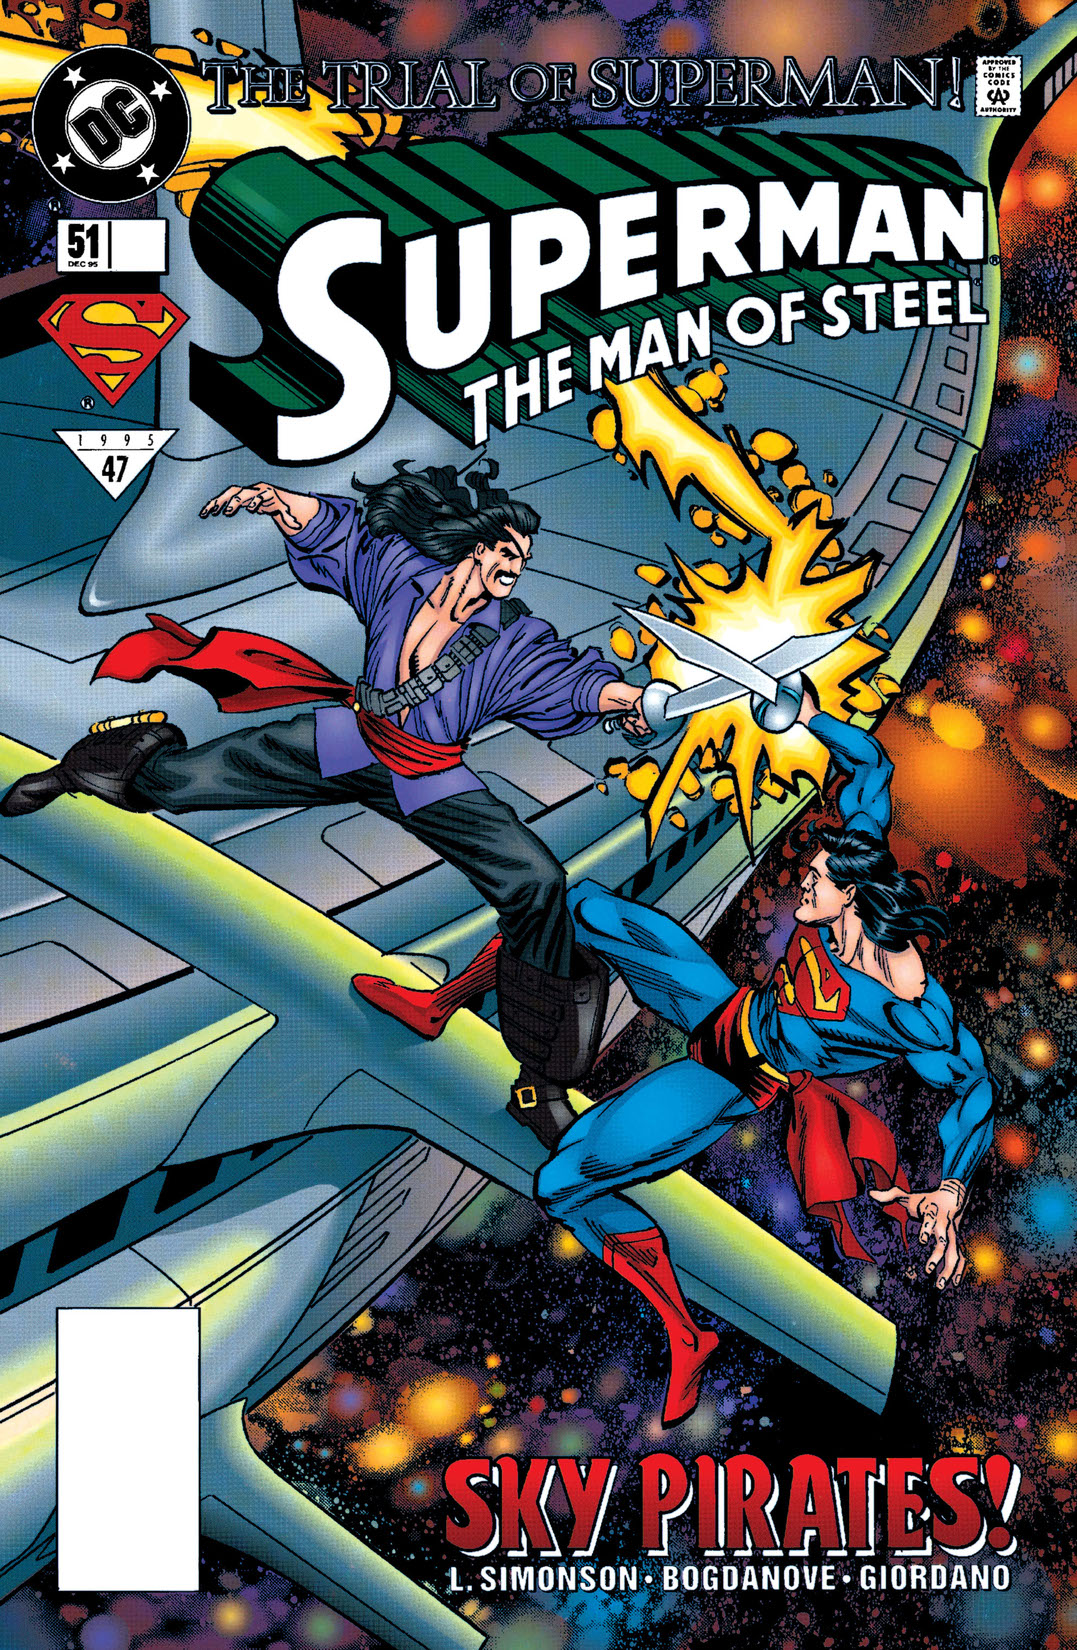 Superman: The Man of Steel #51 preview images